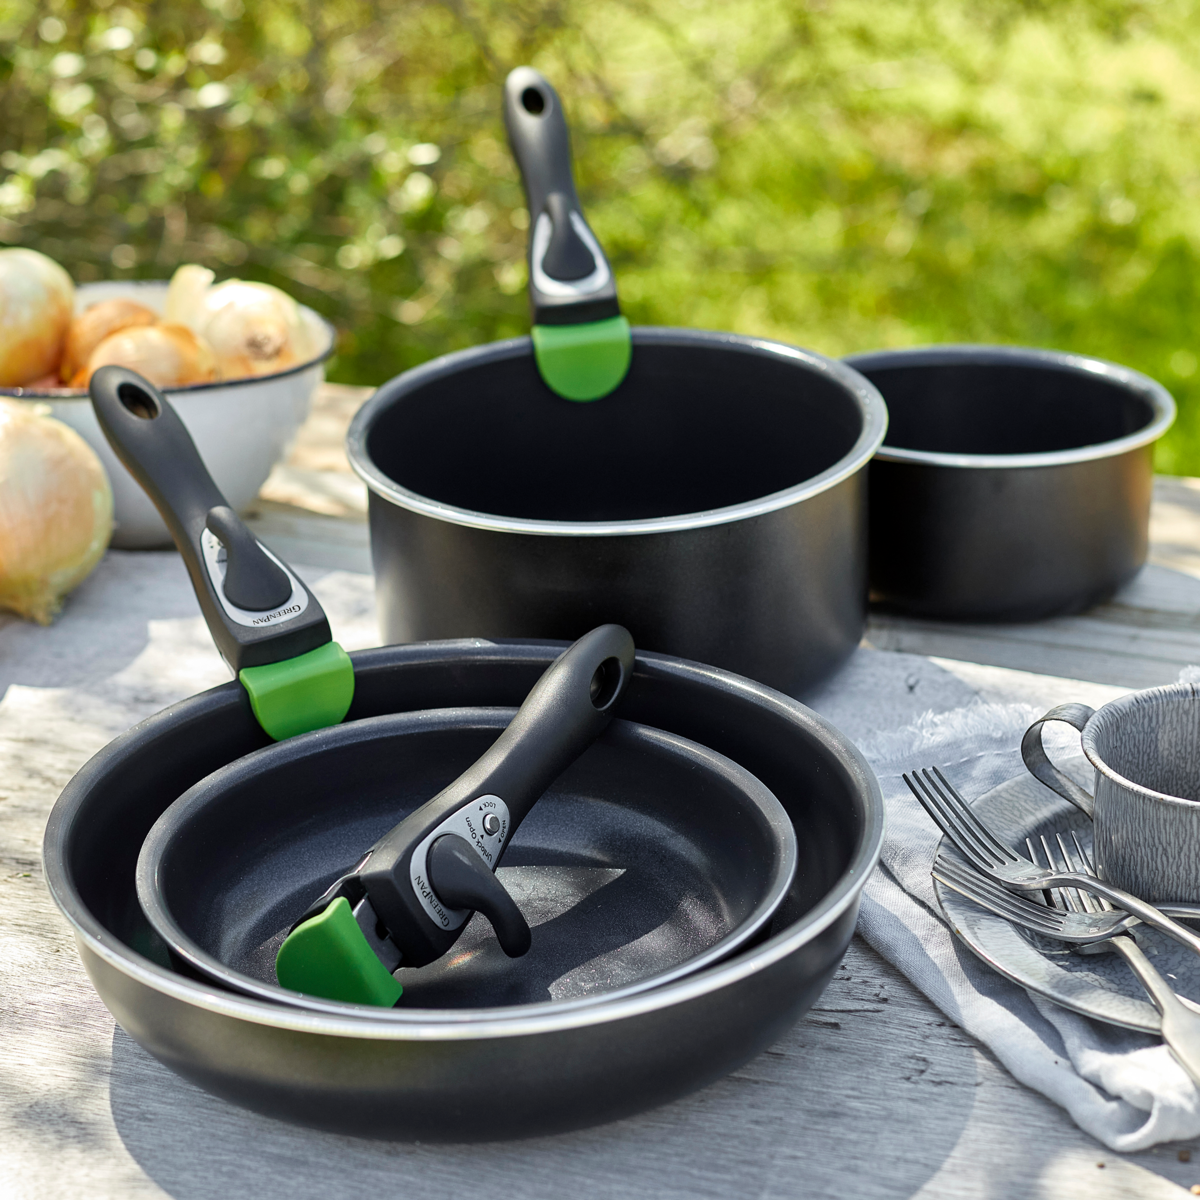 Southern Living by GreenPan Ceramic Nonstick Tri-Ply Stainless Steel 12-Piece Cookware Set